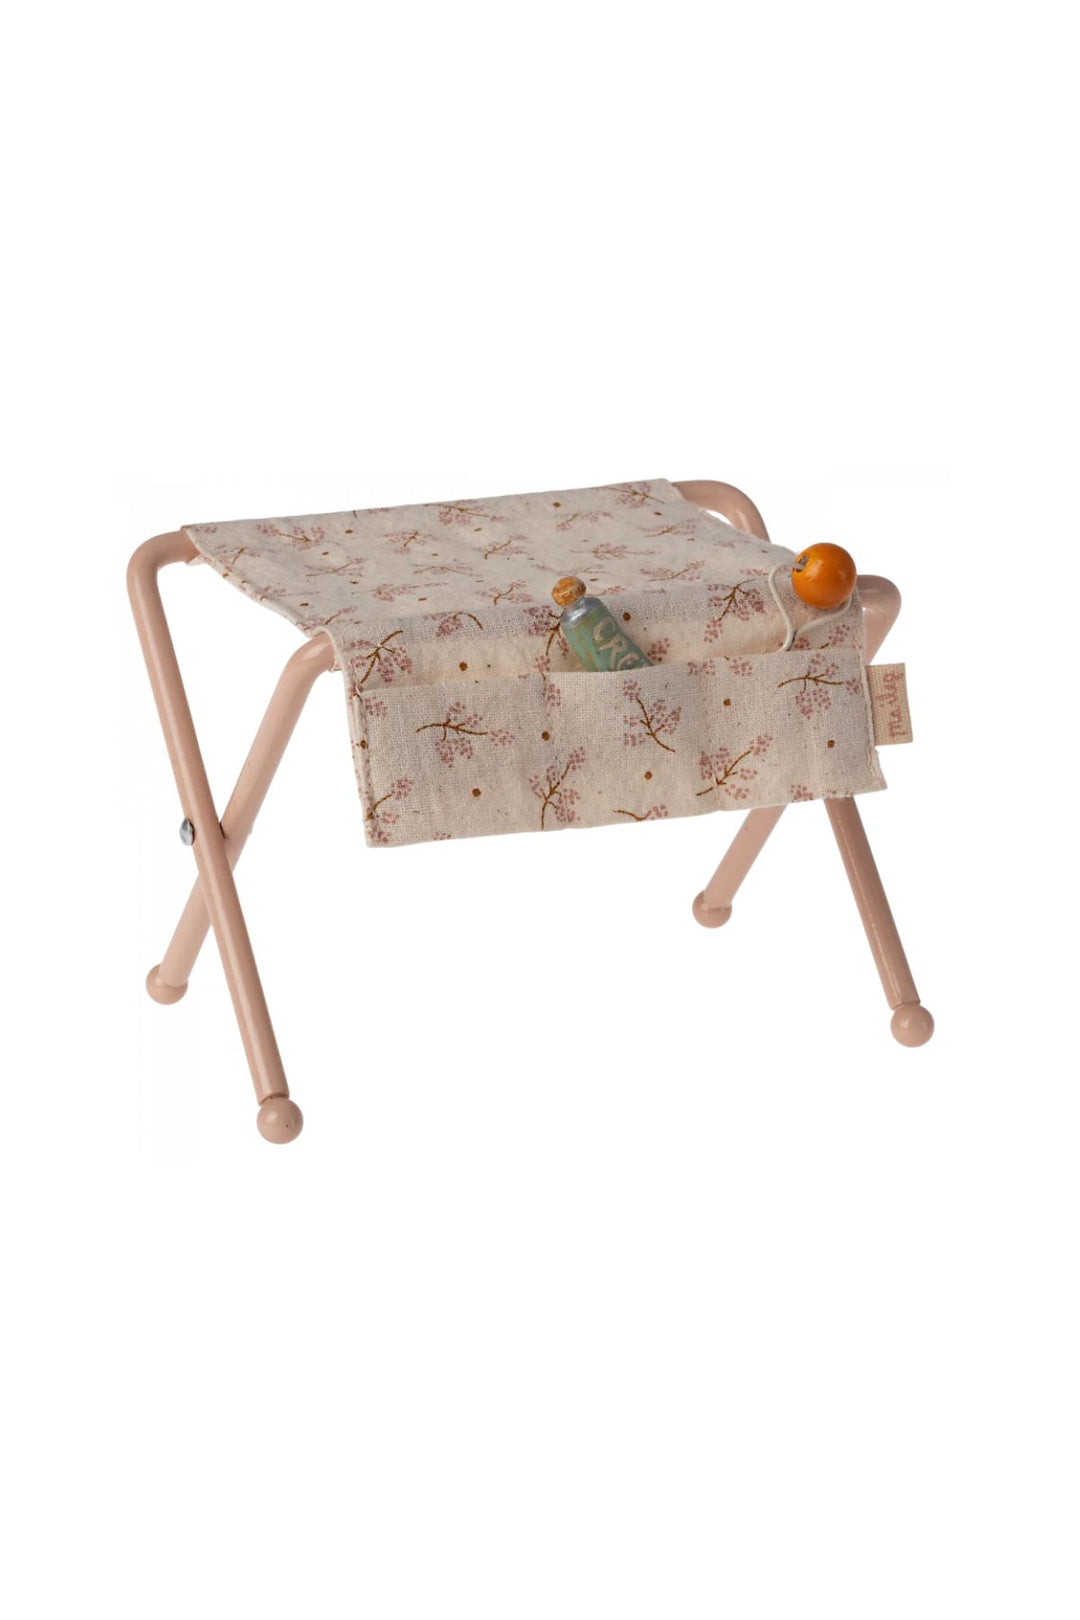 Maileg Nursery Table, Baby Mouse - Rose: Dollhouse Essential